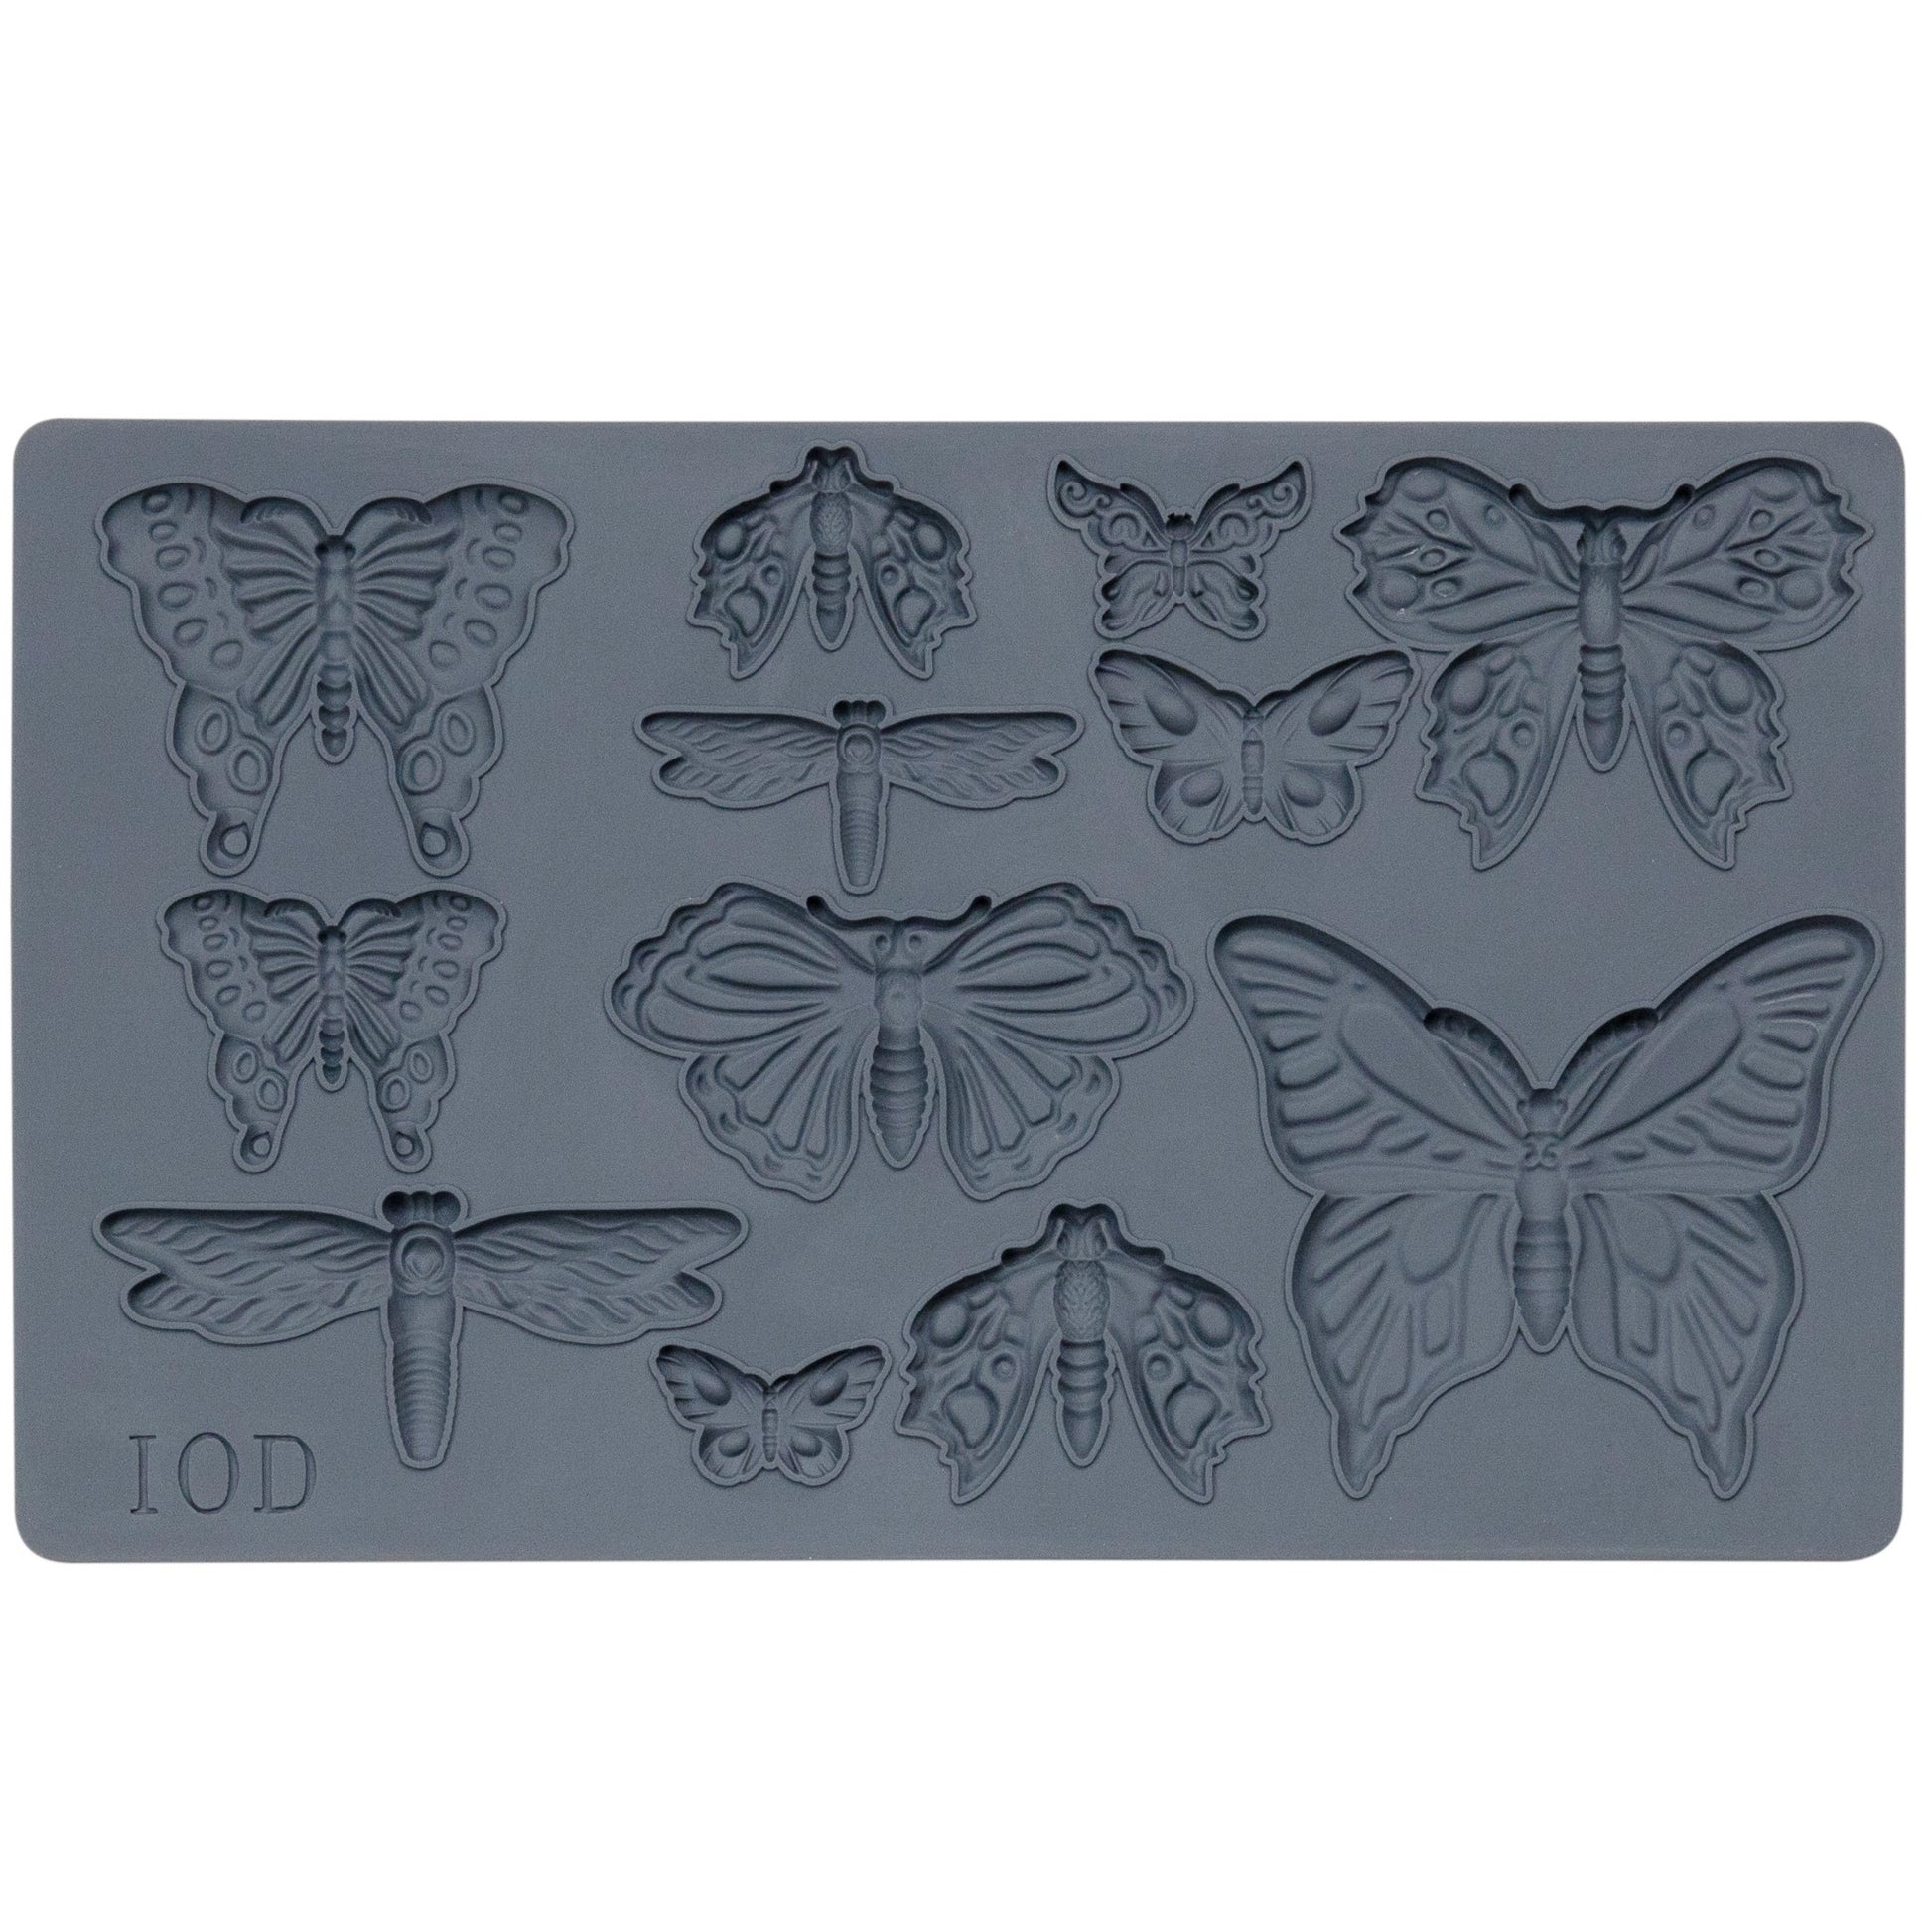 IOD Silicone Mould "Monarch" by Iron Orchid Designs available at Milton's Daughter